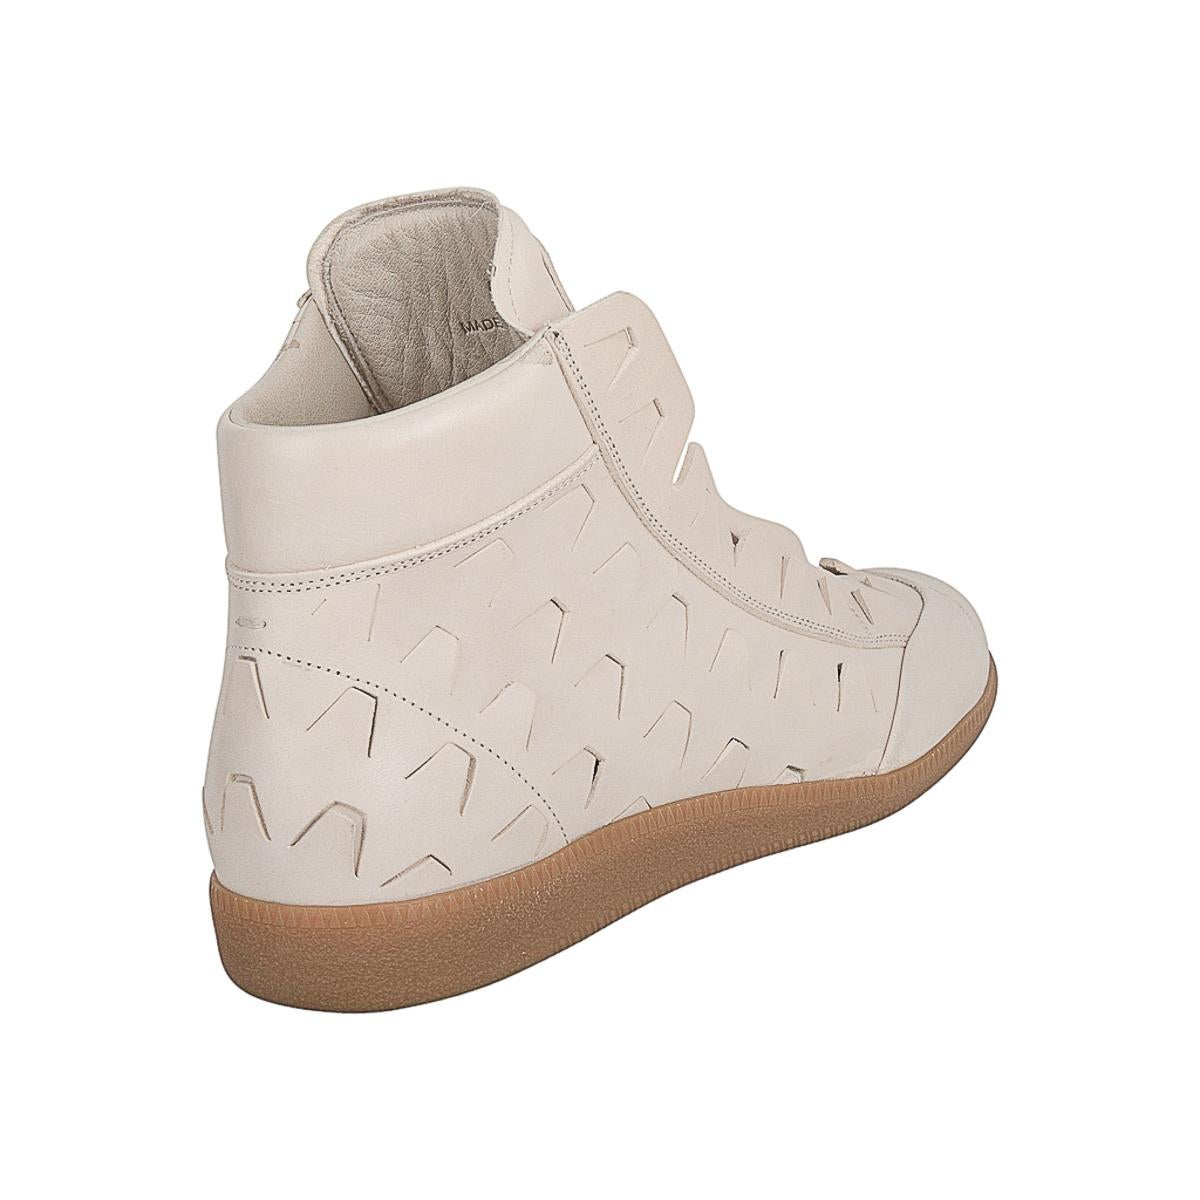 Rare Maison Martin Margiela men's high top sneaker with cut out detail. 
High top sneaker in bone.
Zip top and cut out detail on replica leather. 
Toe on one foot has some light markings - see photo please.
Comes with signature box.
NEW or NEVER